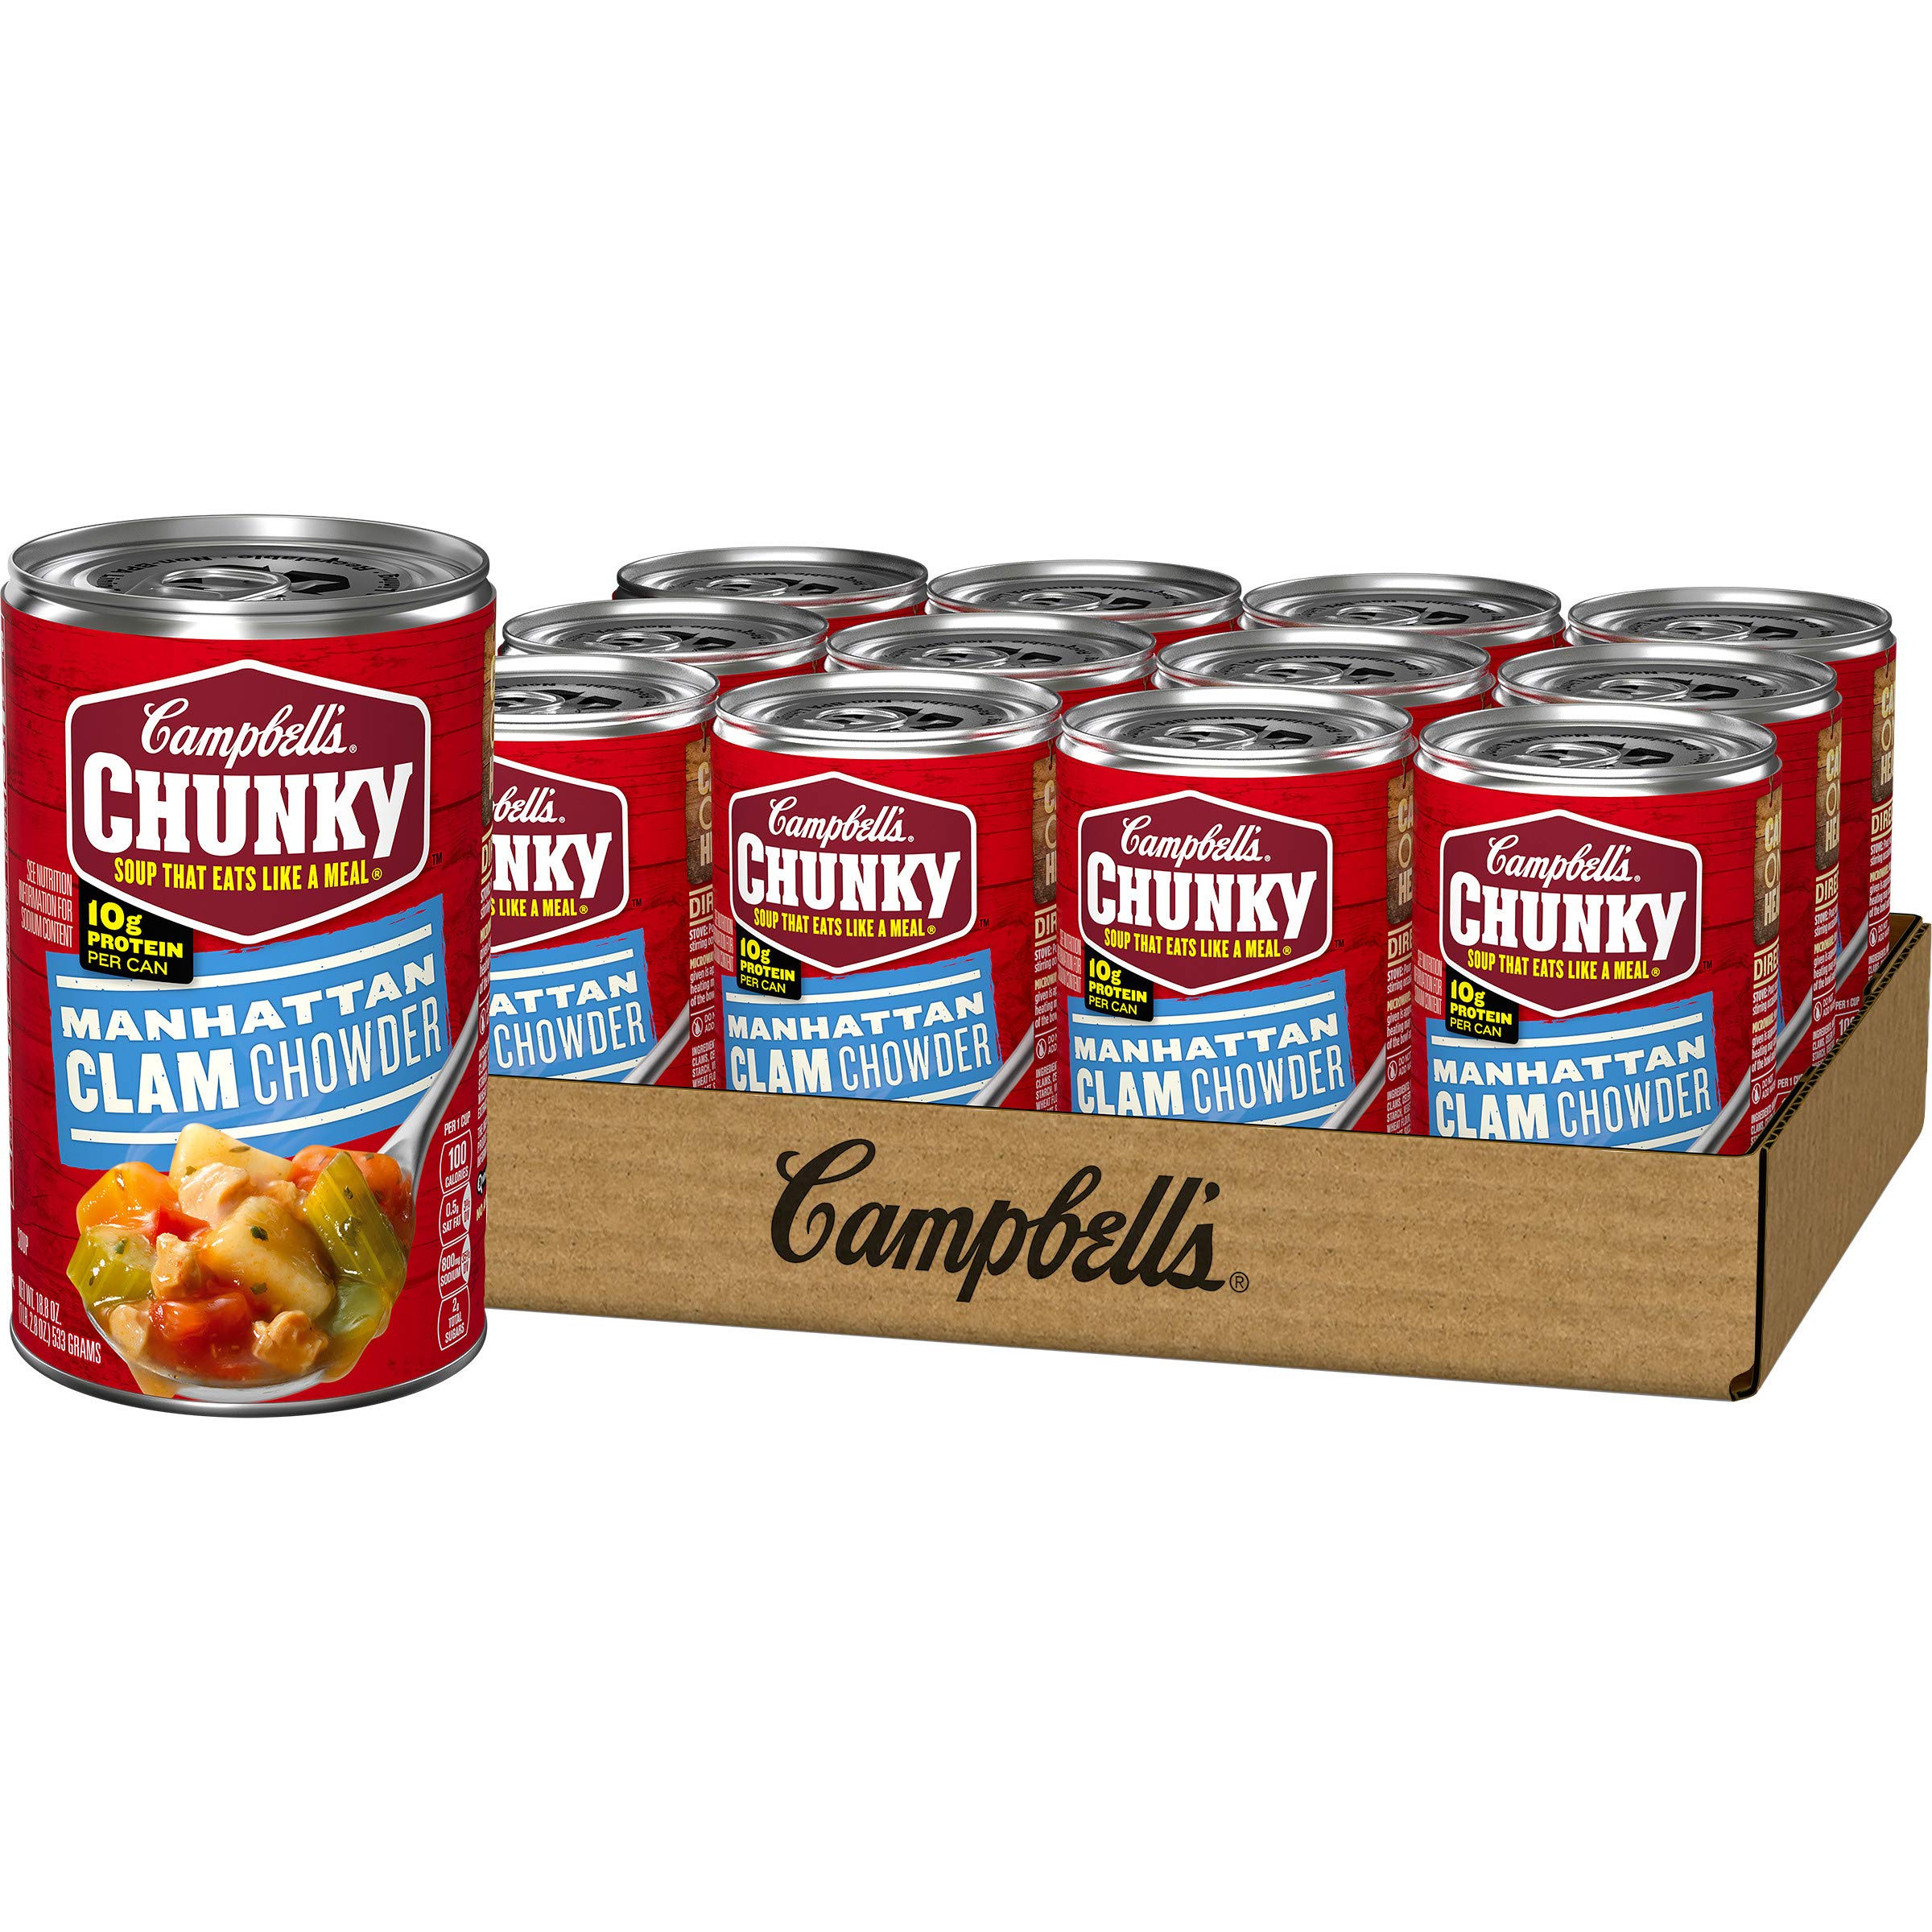 Campbell's Chunky Manhattan Clam Chowder, 18.8 oz. Can (Pack of 12)